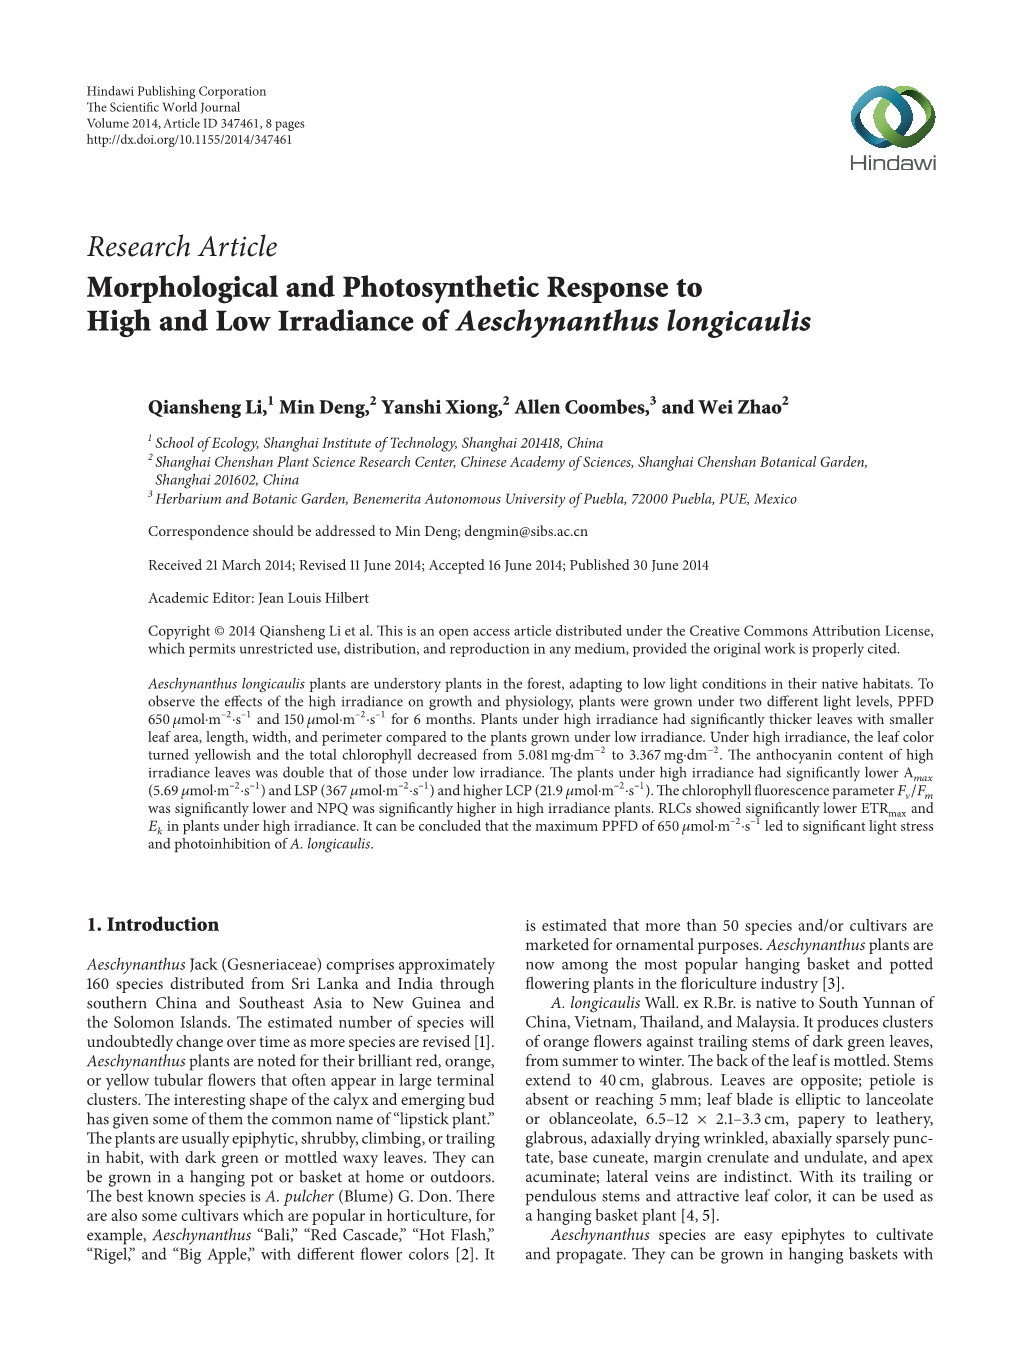 Morphological and Photosynthetic Response to High and Low Irradiance of Aeschynanthus Longicaulis